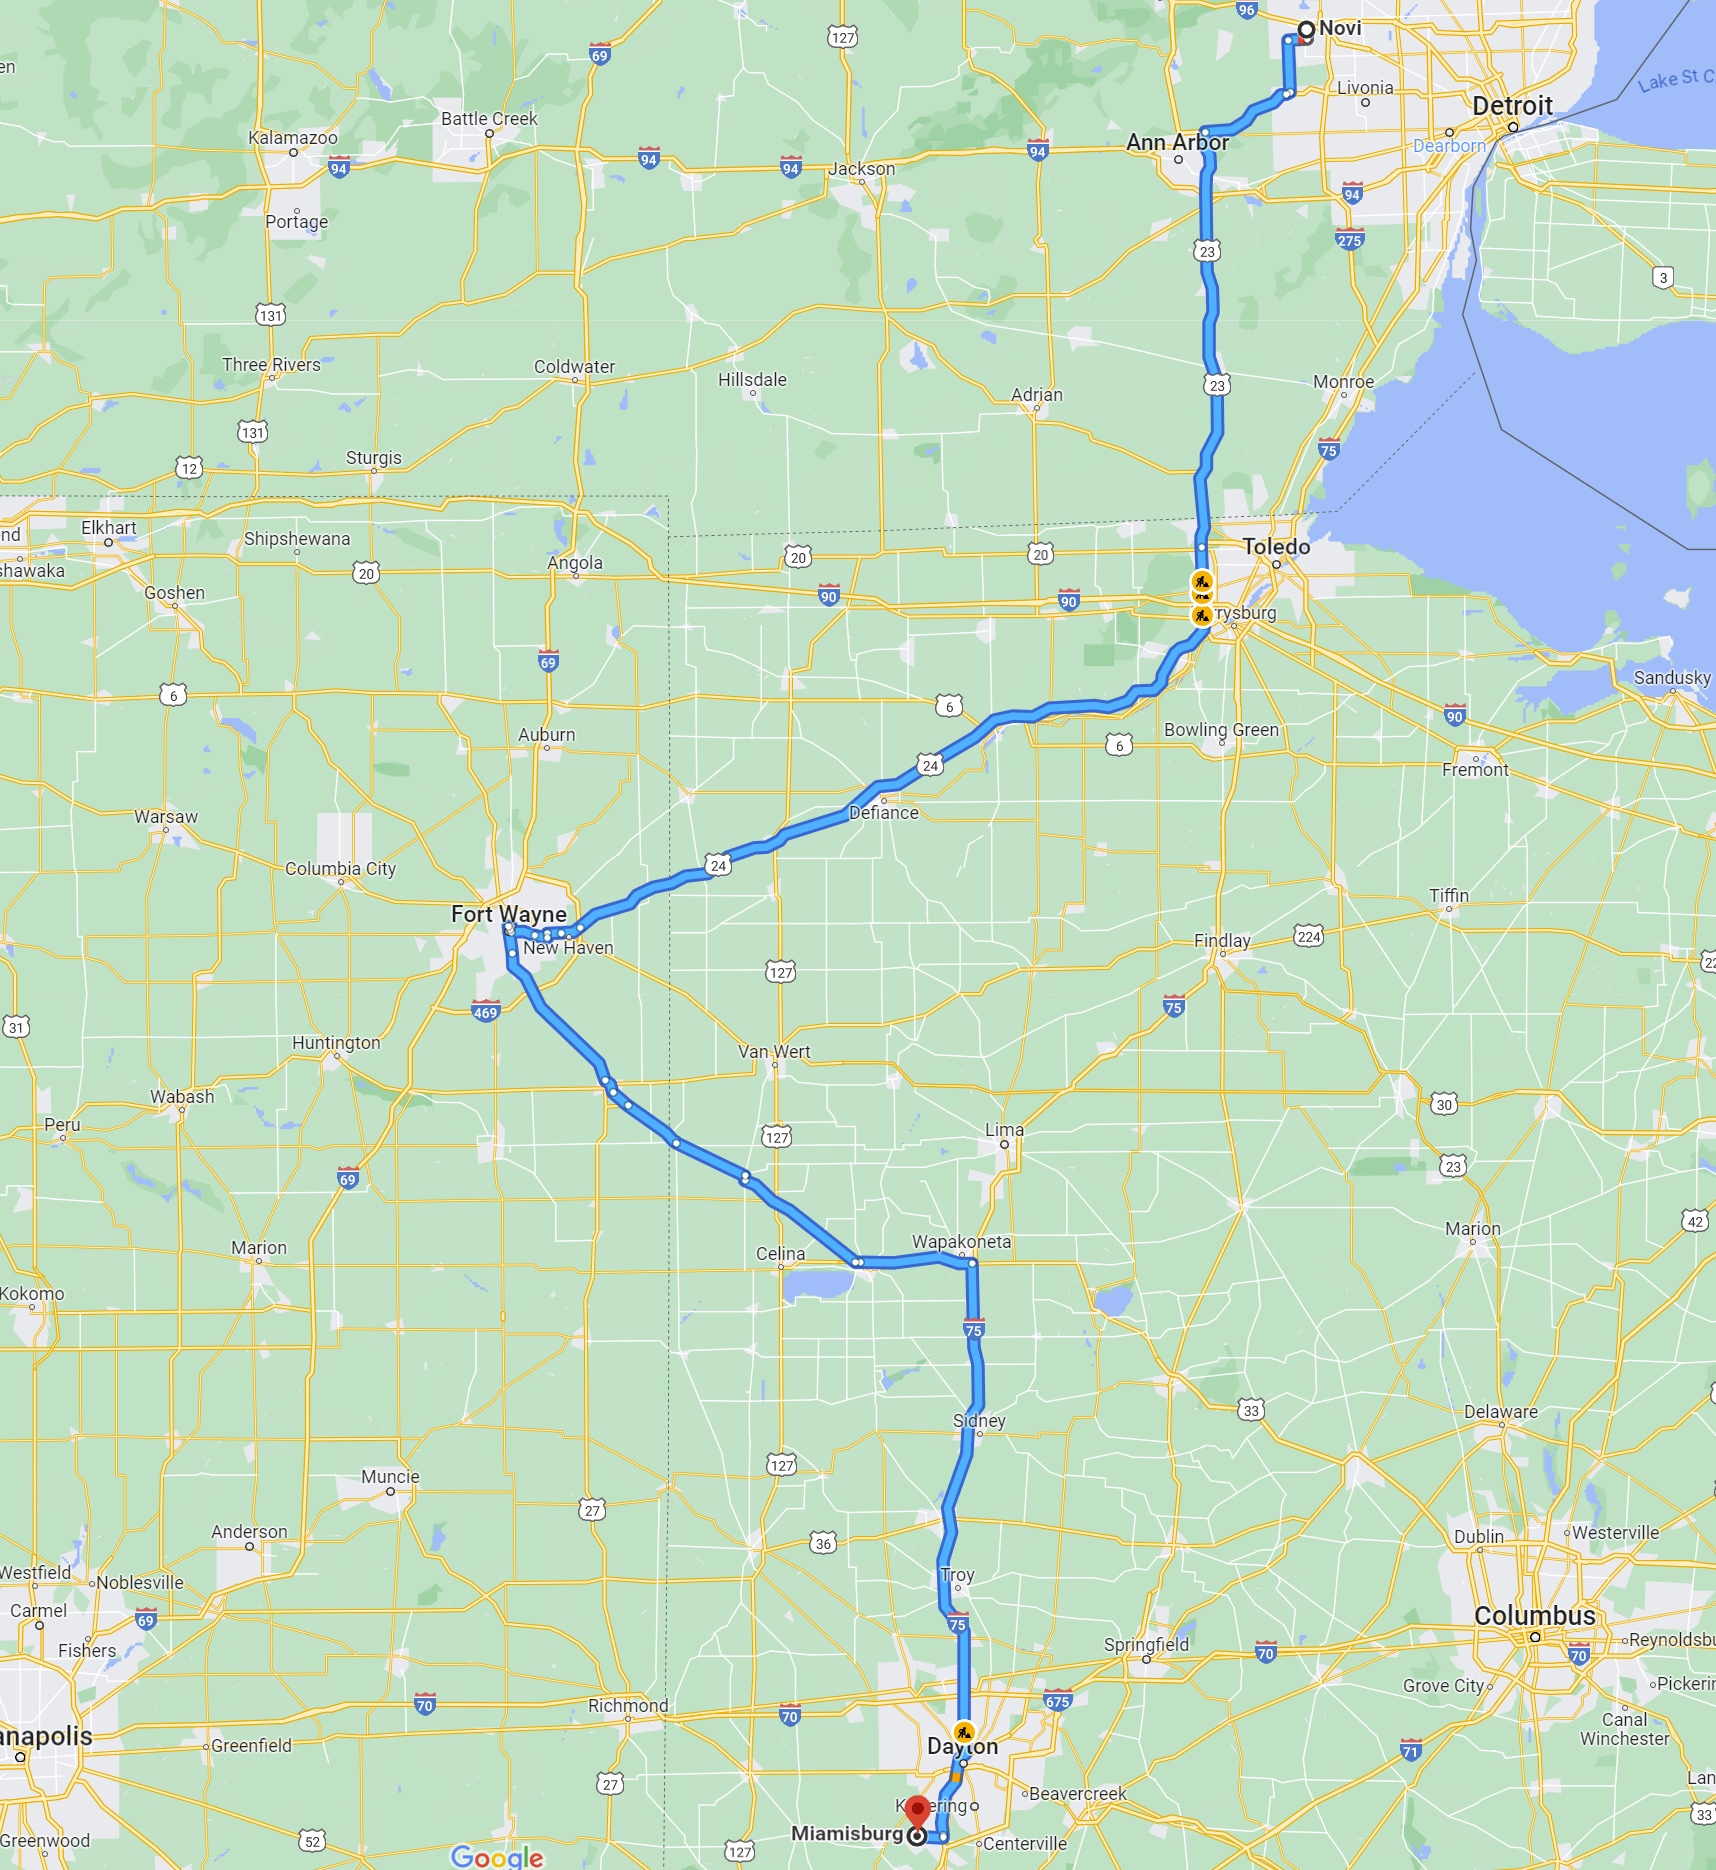 A map showing the route taken from Miamisburg, Ohio, through Fort Wayne, Indiana, to Novi, Michigan.